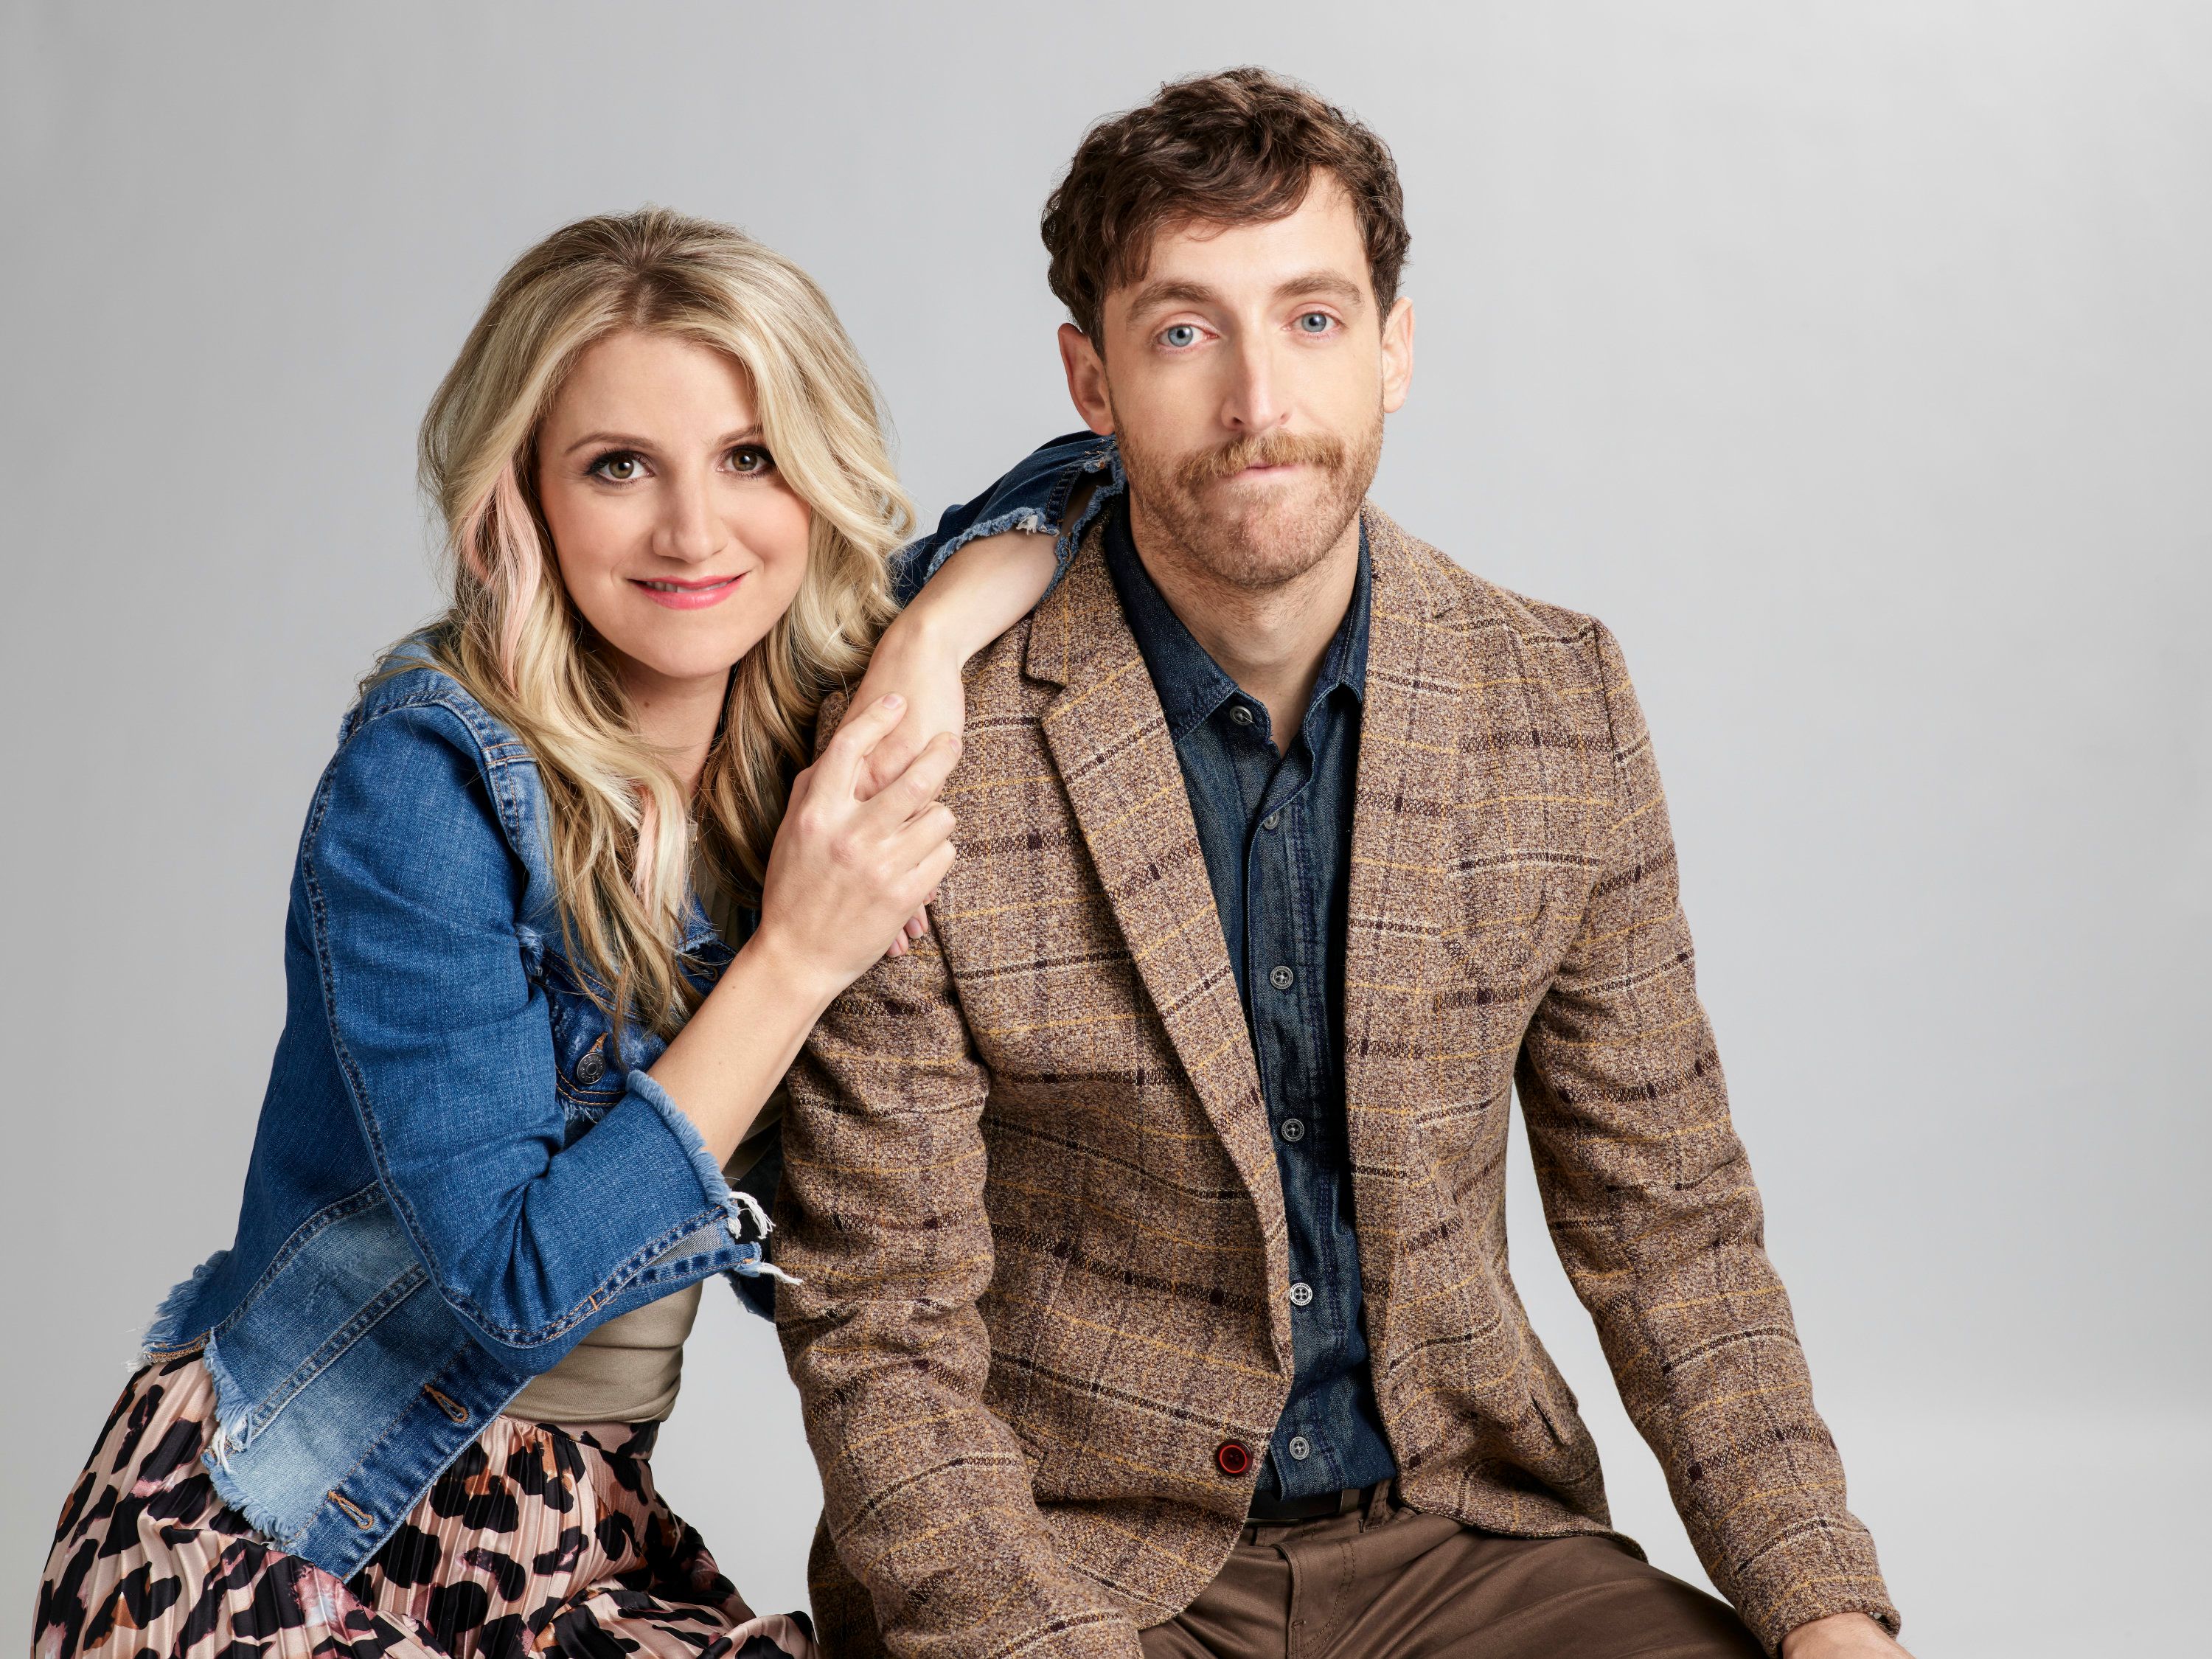 Annaleigh Ashford as Gina and ​Thomas Middleditch as Drew